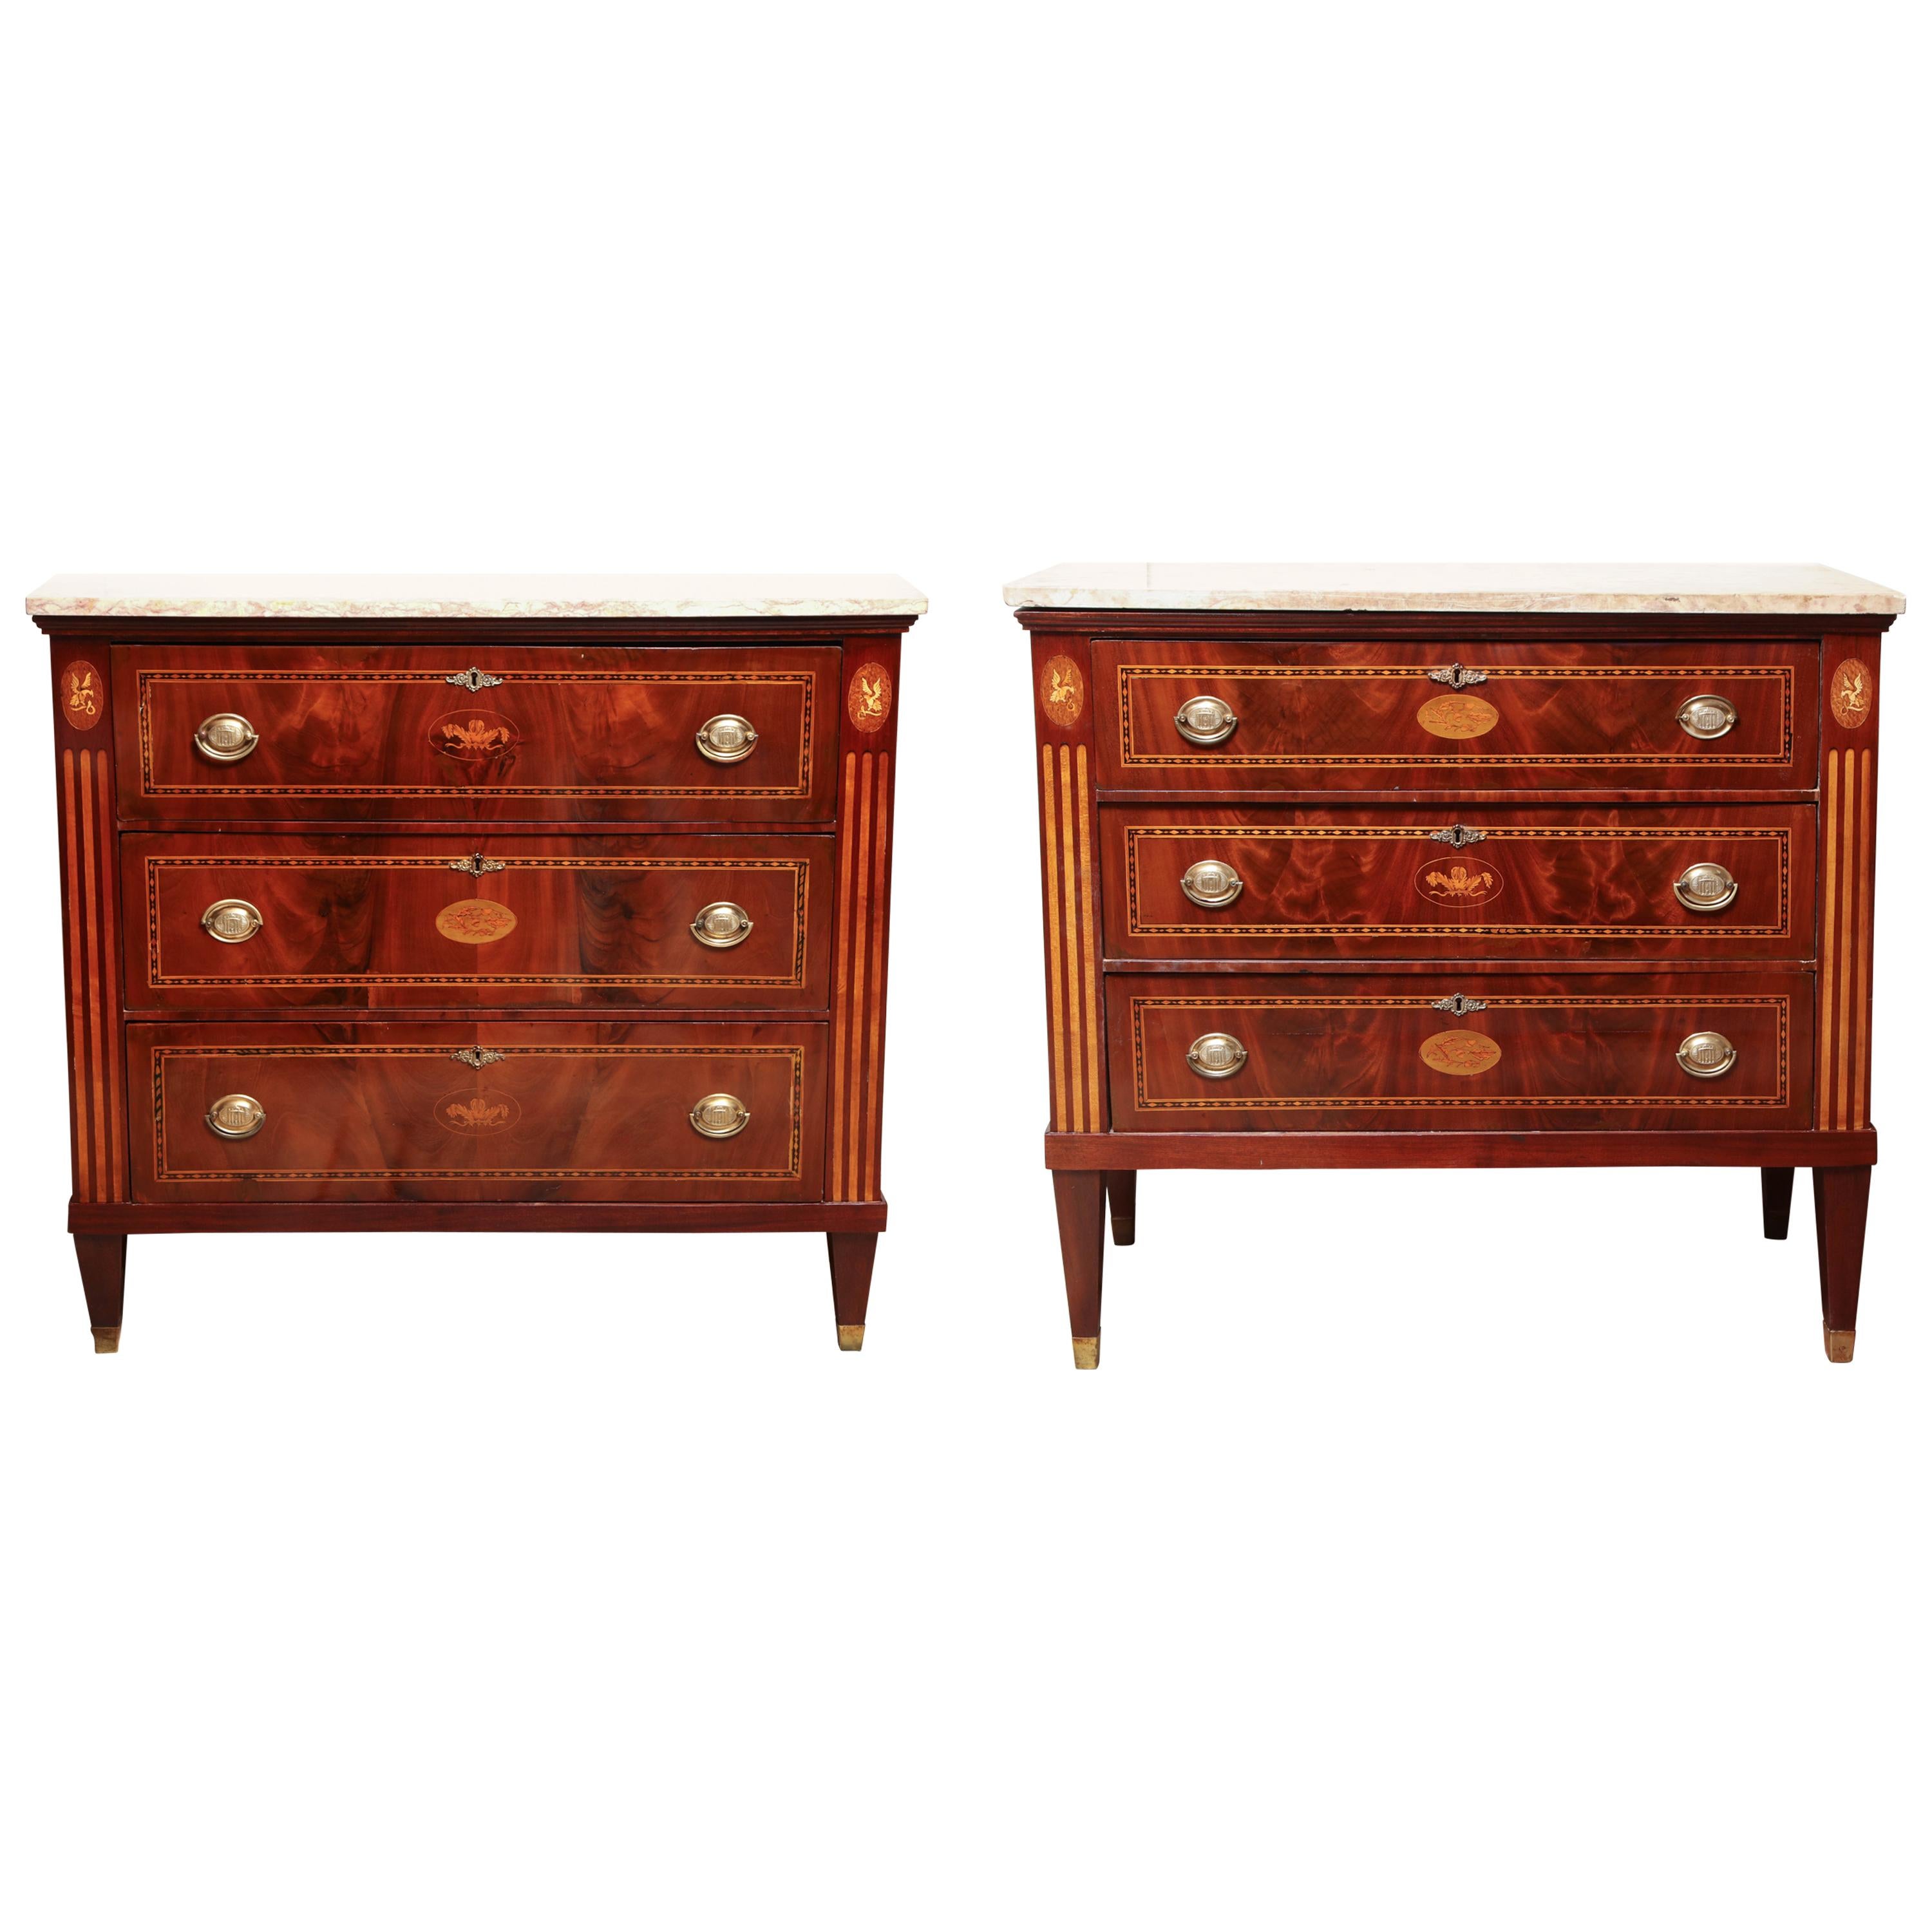 Pair of Dutch Neoclassic Commodes